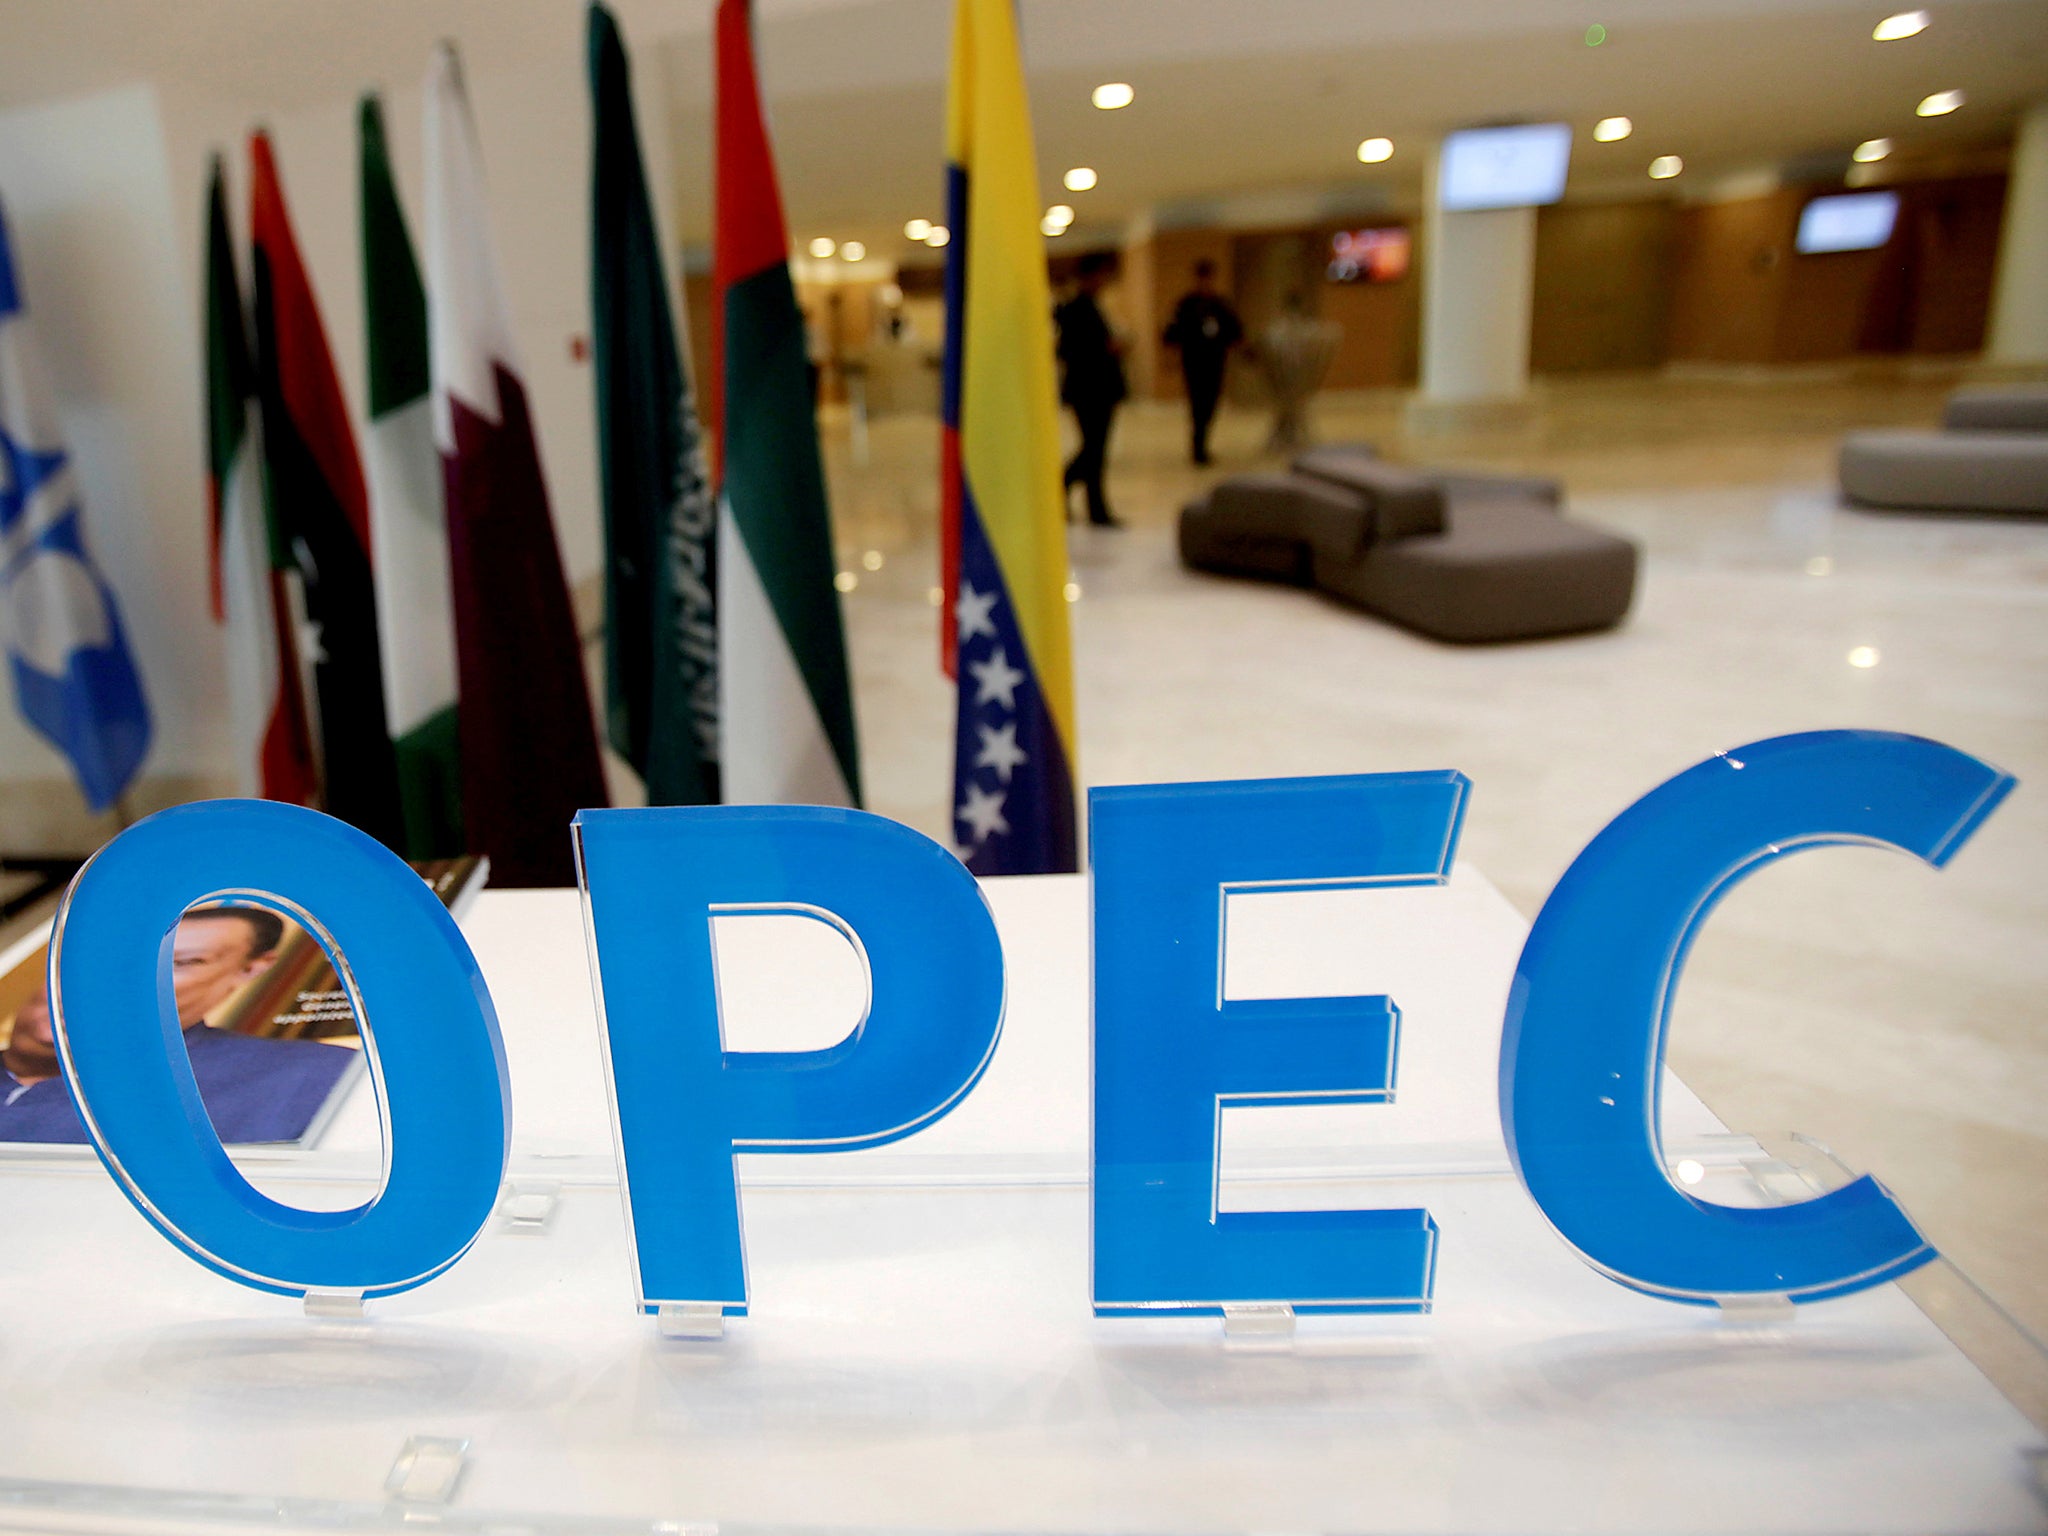 Opec has agreed to cut output by 1.2 million barrels a day